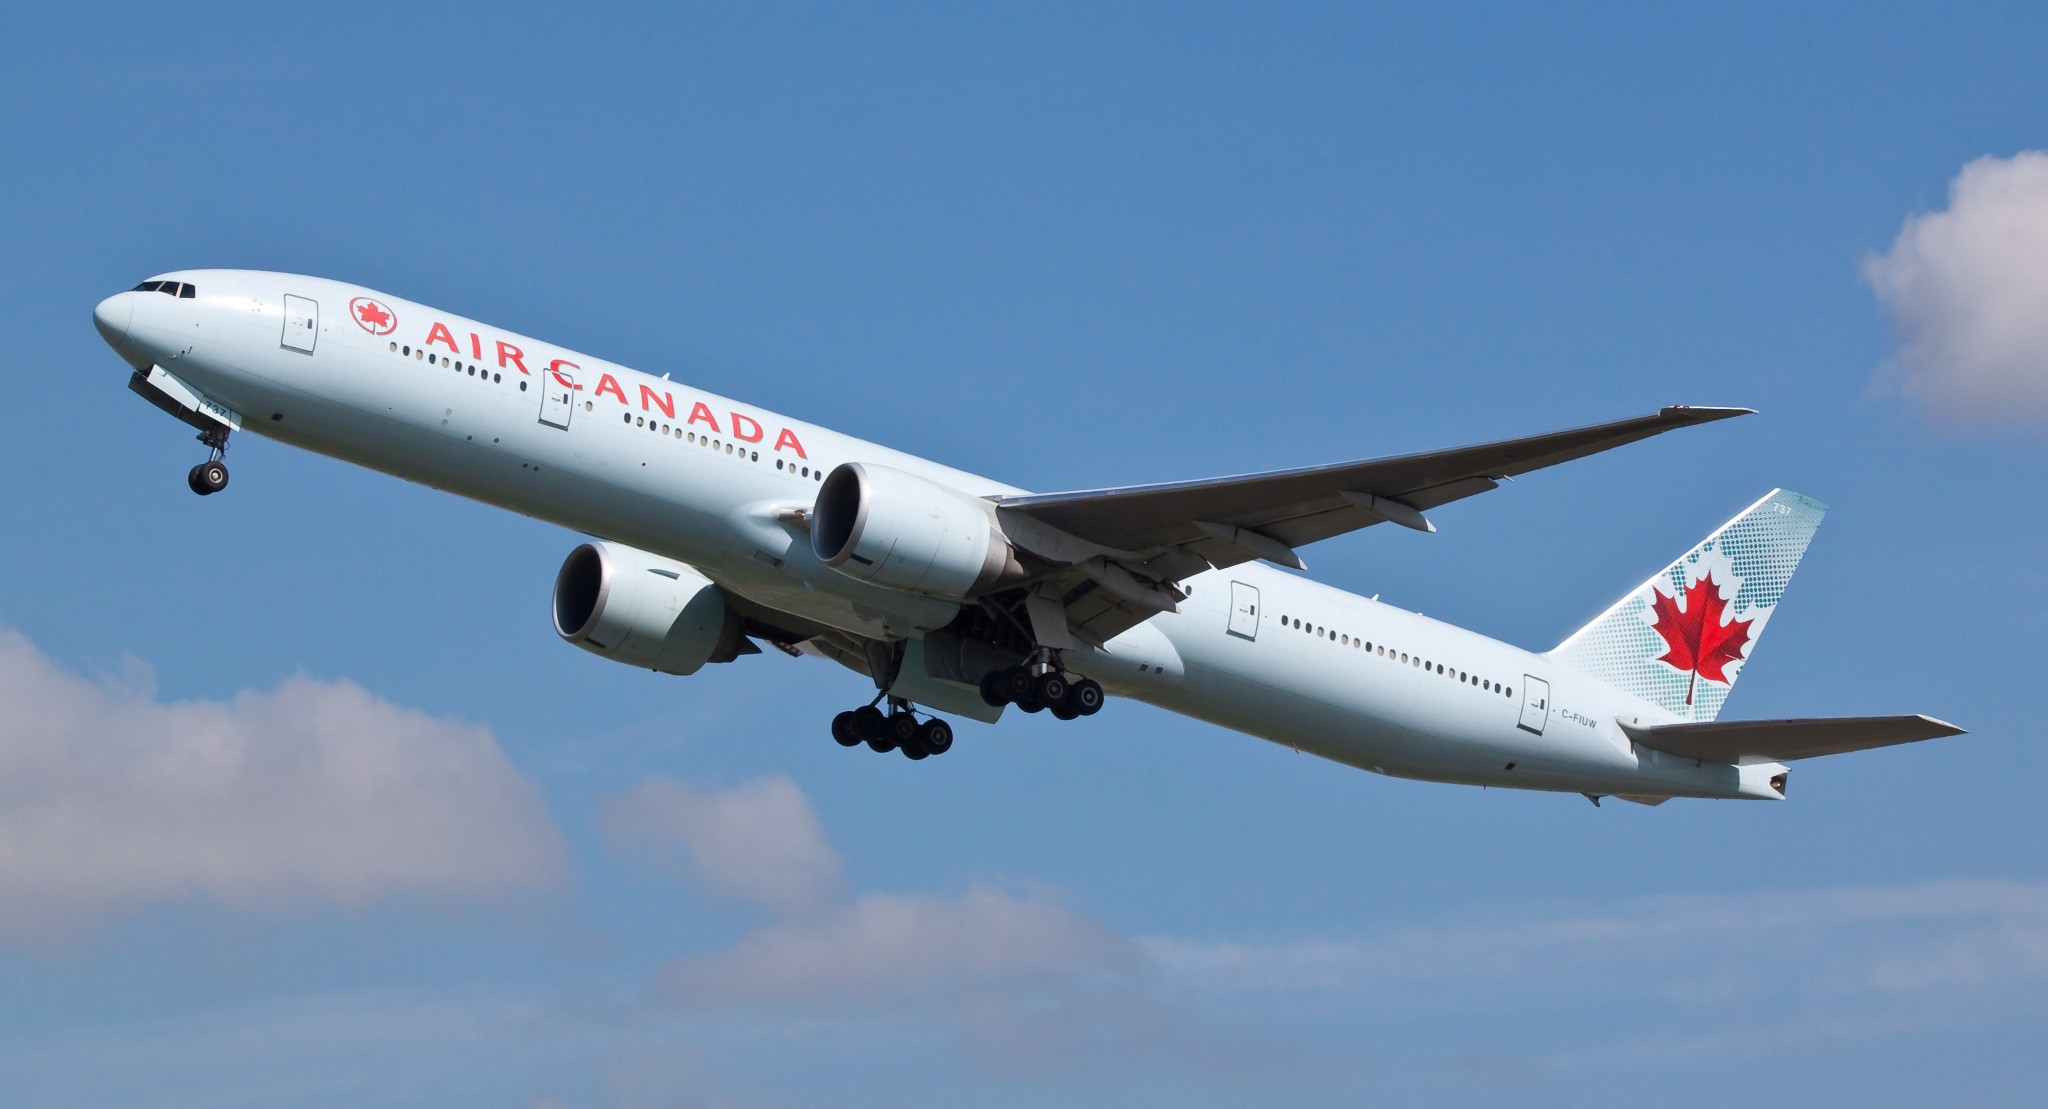 Air Canada reveals ‘better-than-expected’ Q2 2019 results despite 737 Max grounding